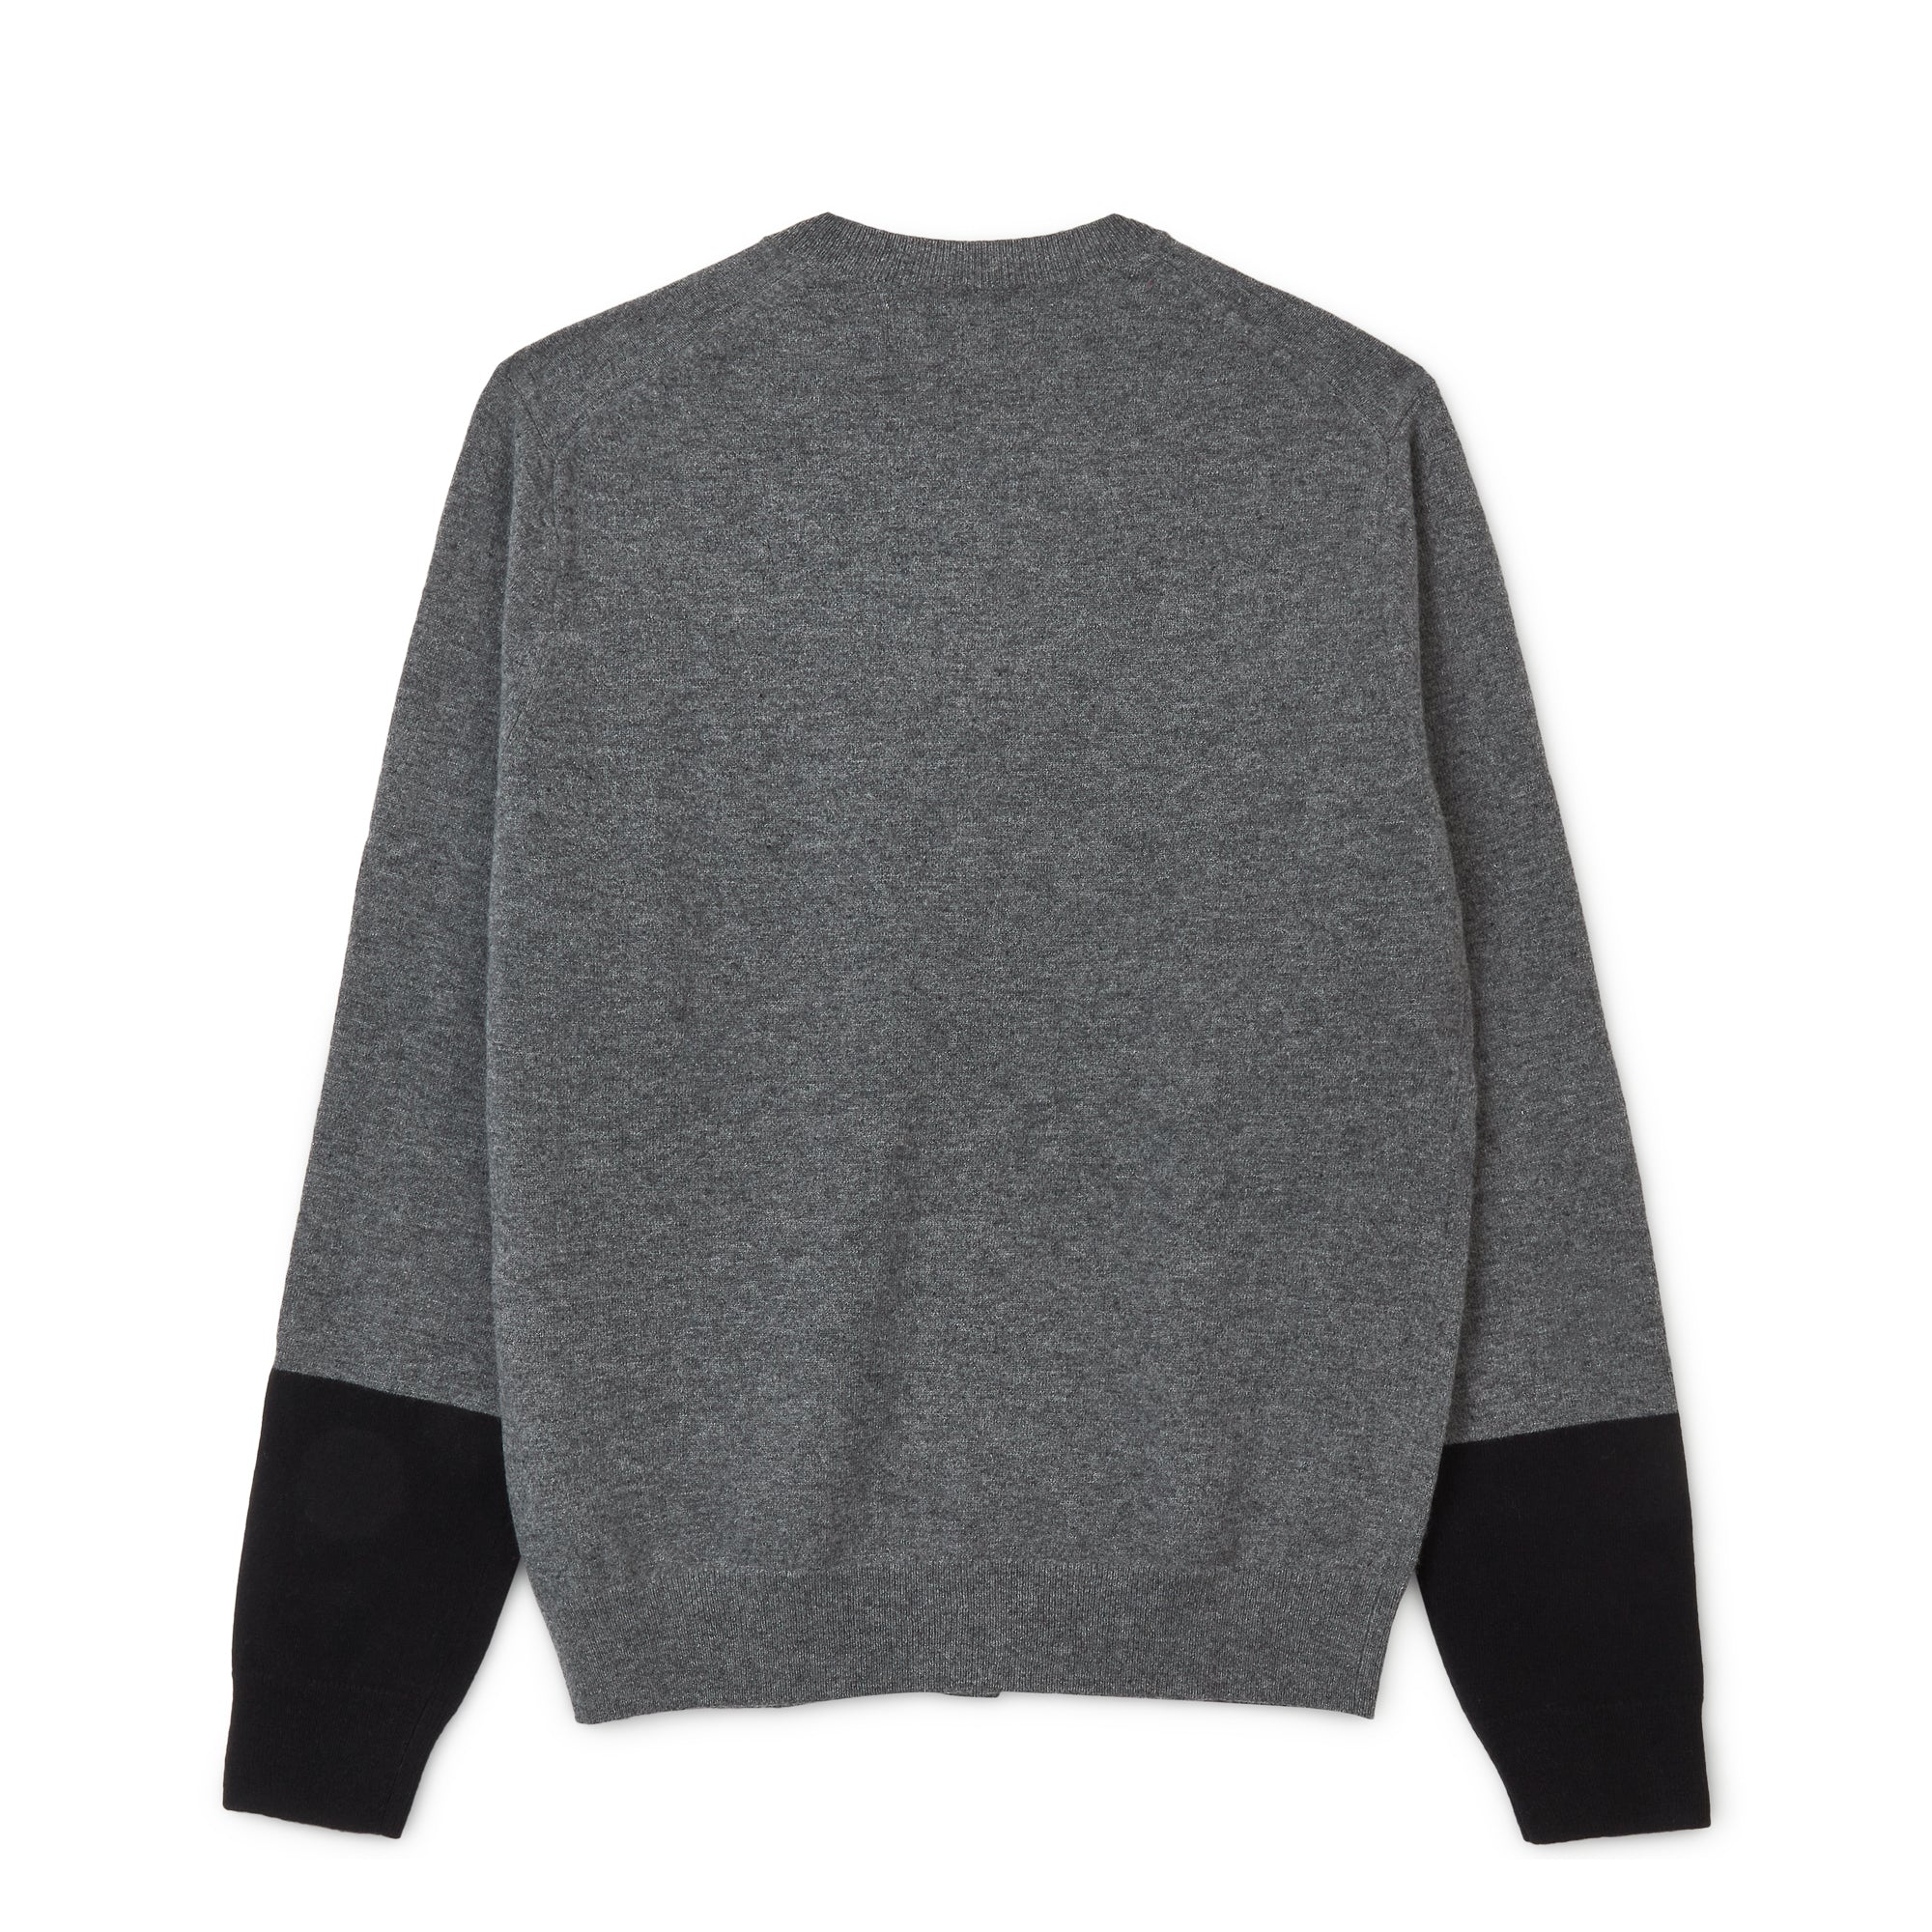 CDG Shirt Forever - Round Neck Contrast Cardigan - (Grey/Black) view 2